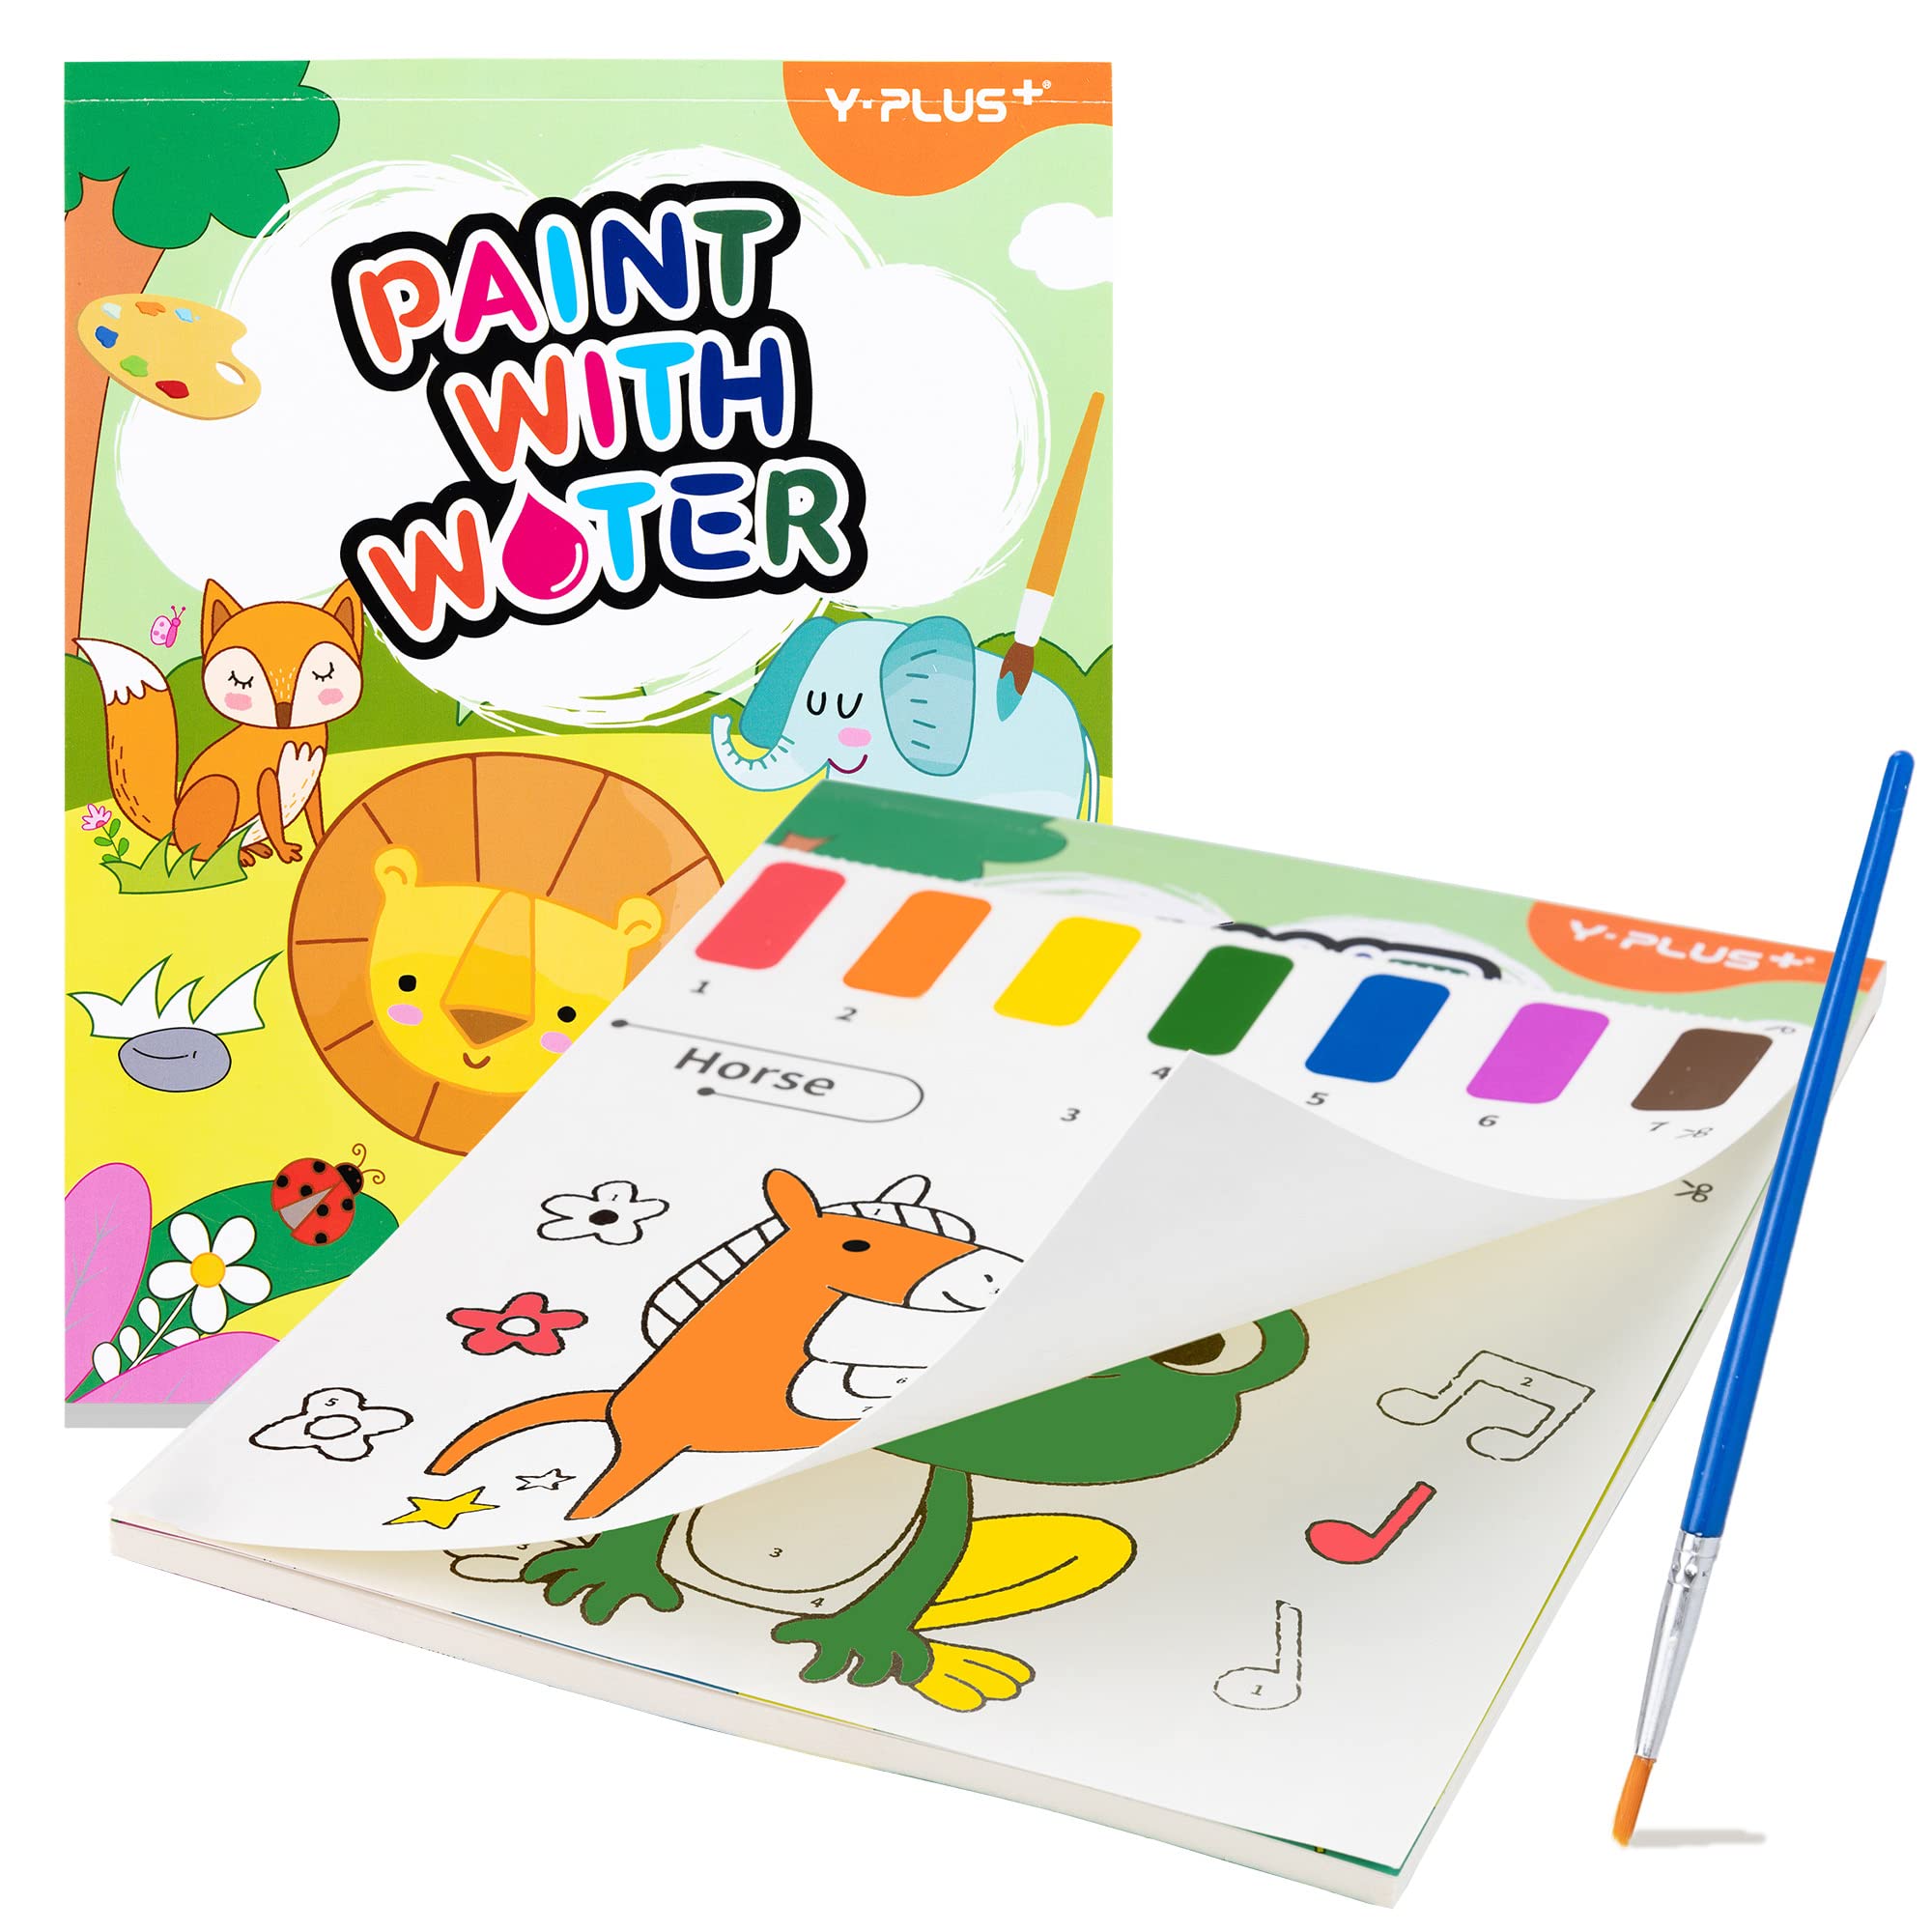 YPLUS Paint with Water Books for Toddlers, Watercolor Painting Paper for Kids Ages 1-3, 2-4, Art Craft Gift for Drawing with Brush, Animals